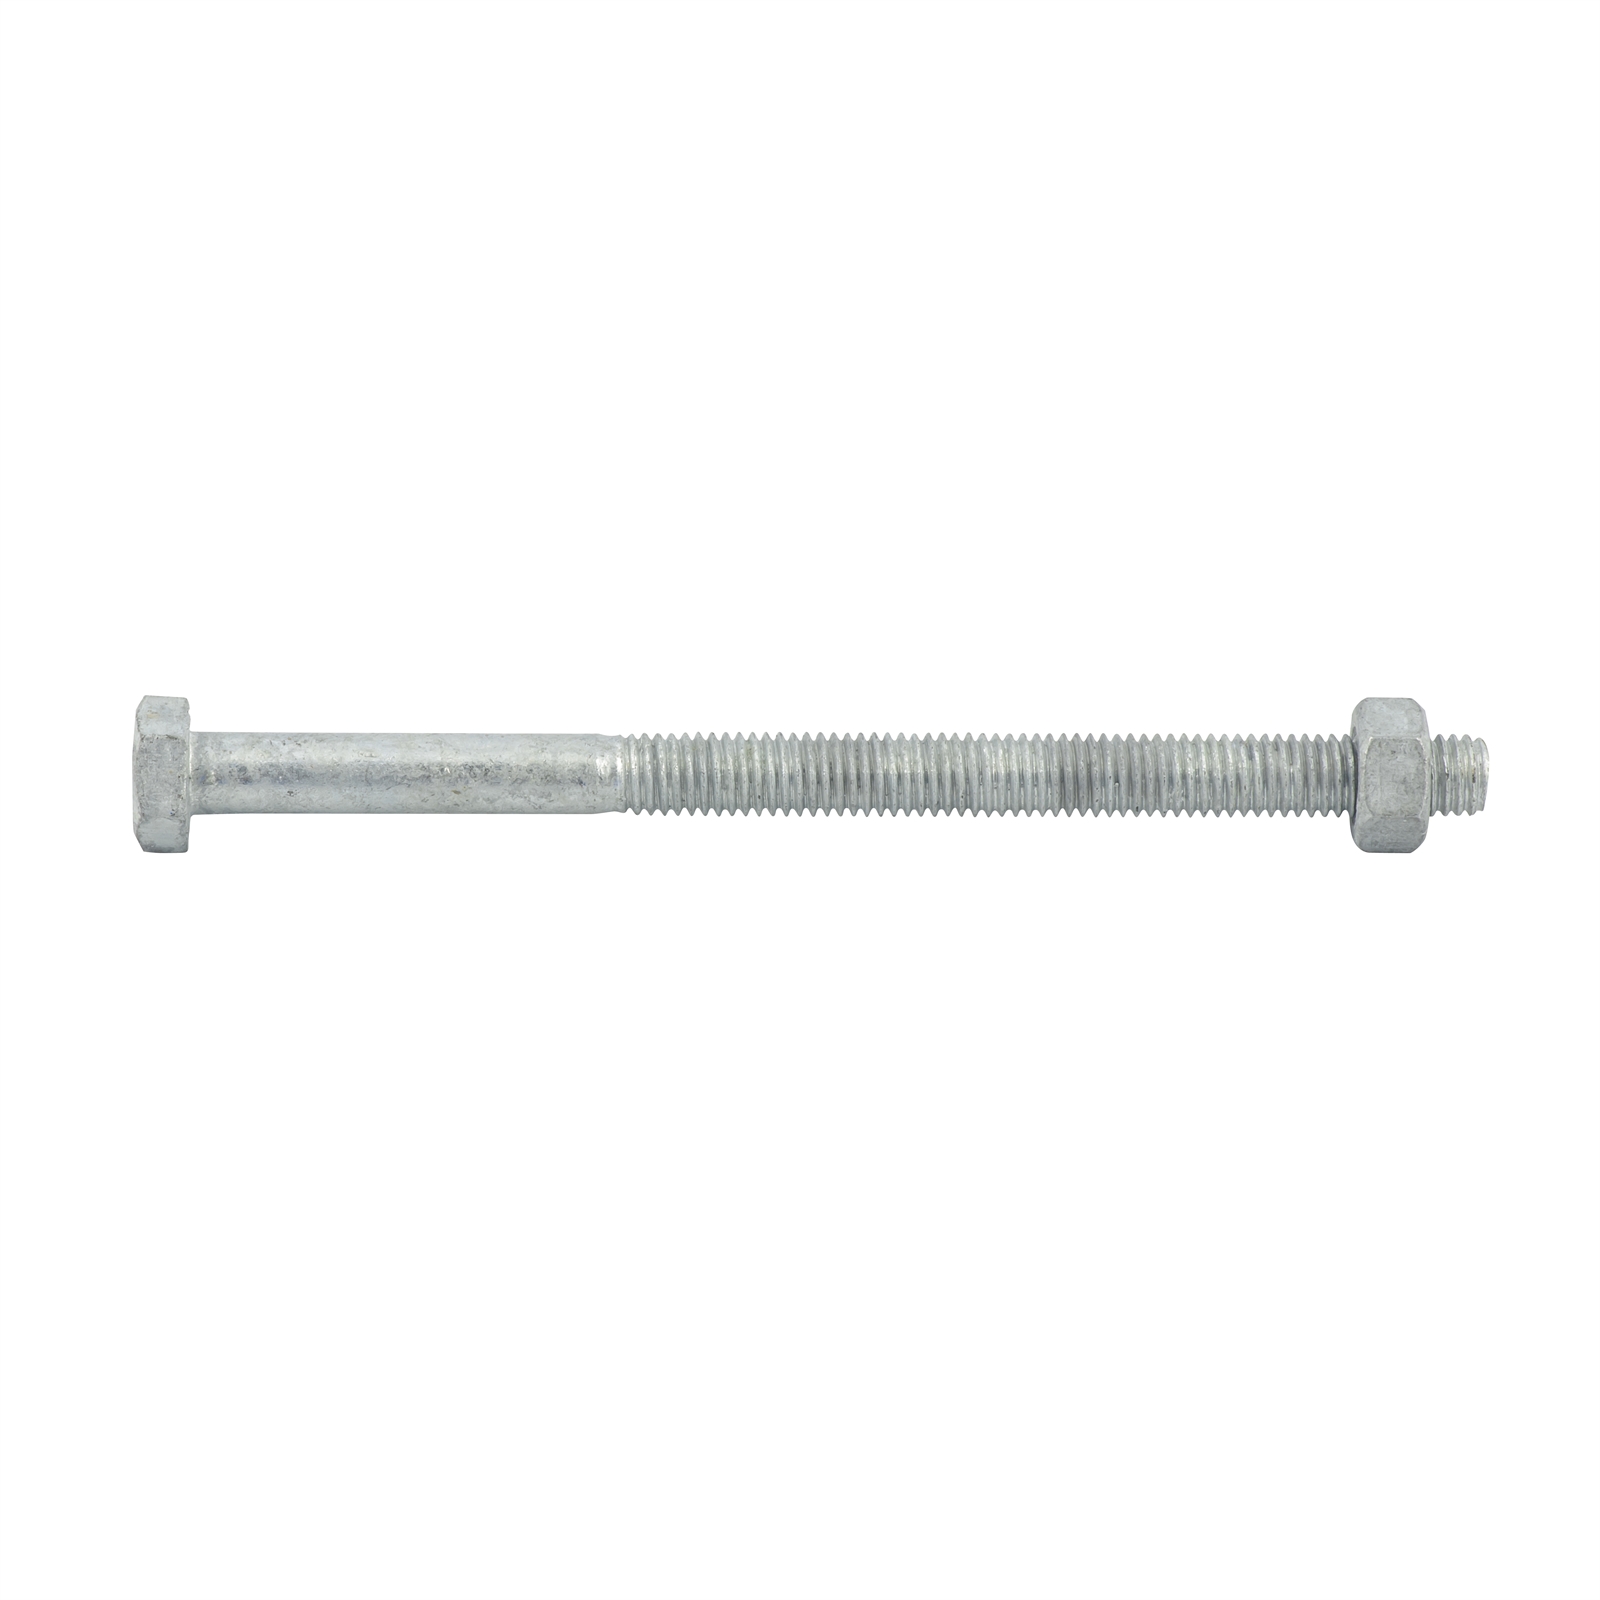 Zenith M8 x 120mm Galvanised Hex Head Bolt and Nut